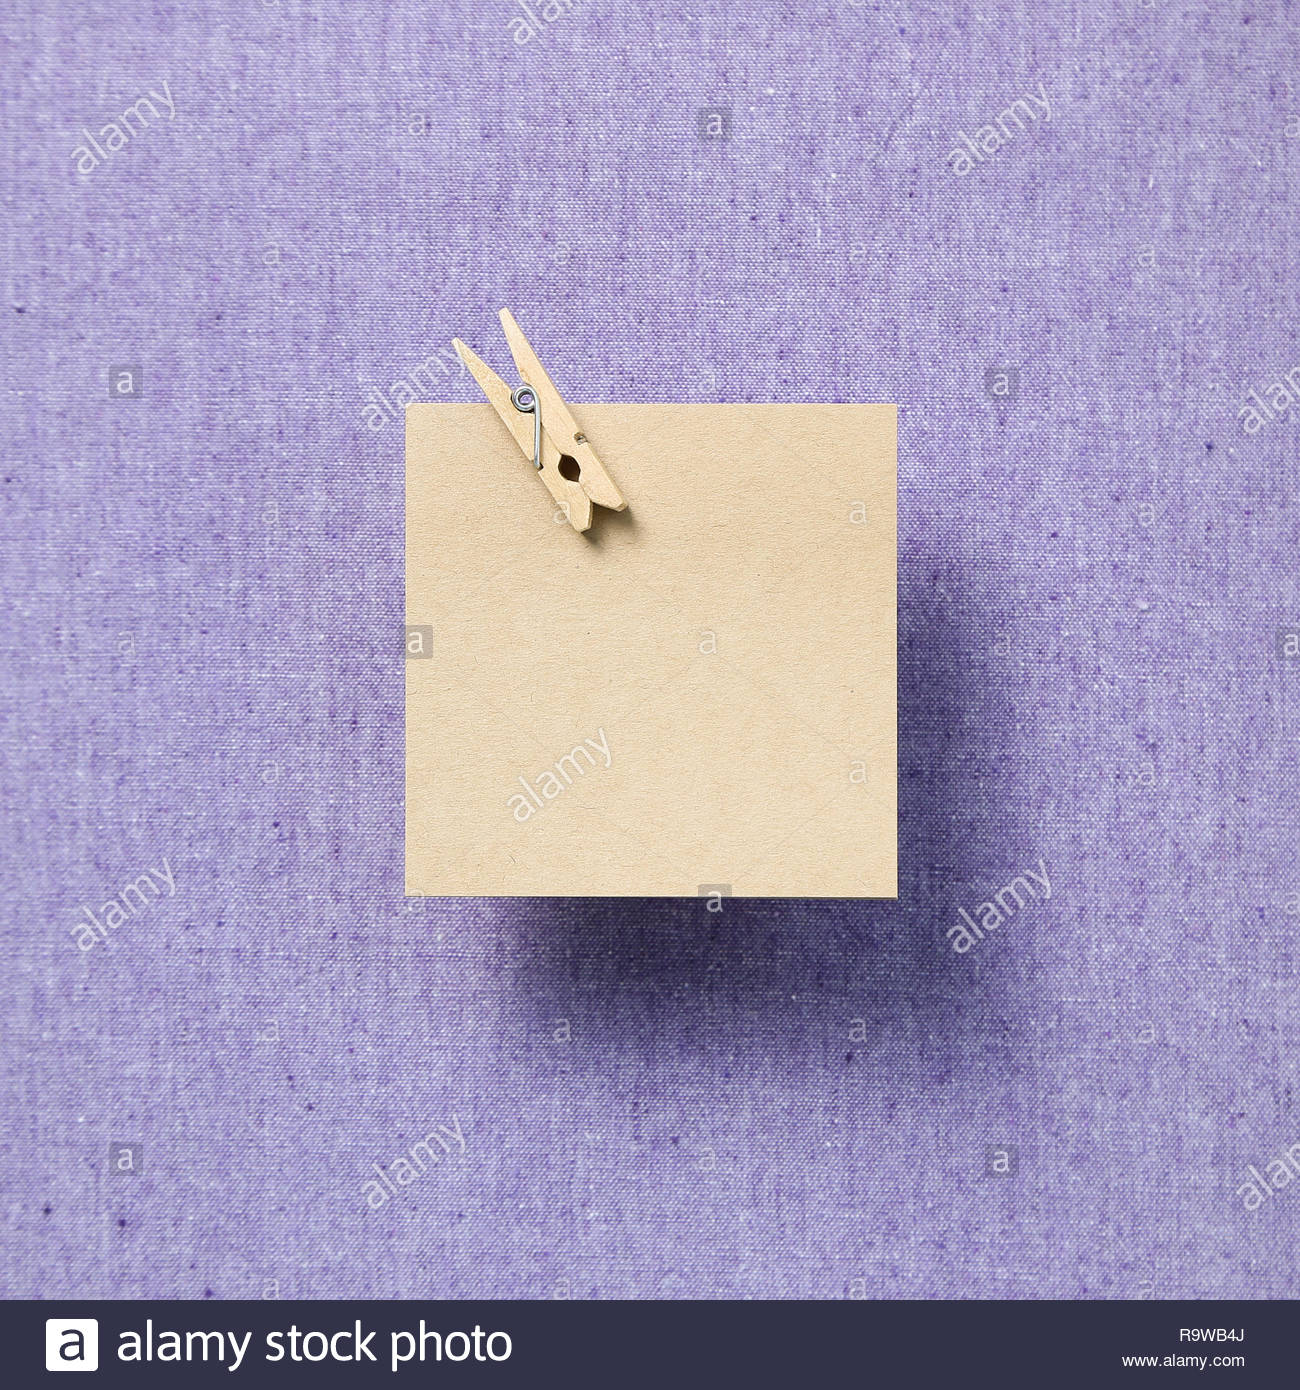 Empty Memo Paper Sticky Notes On Purple Fabric Background Stock